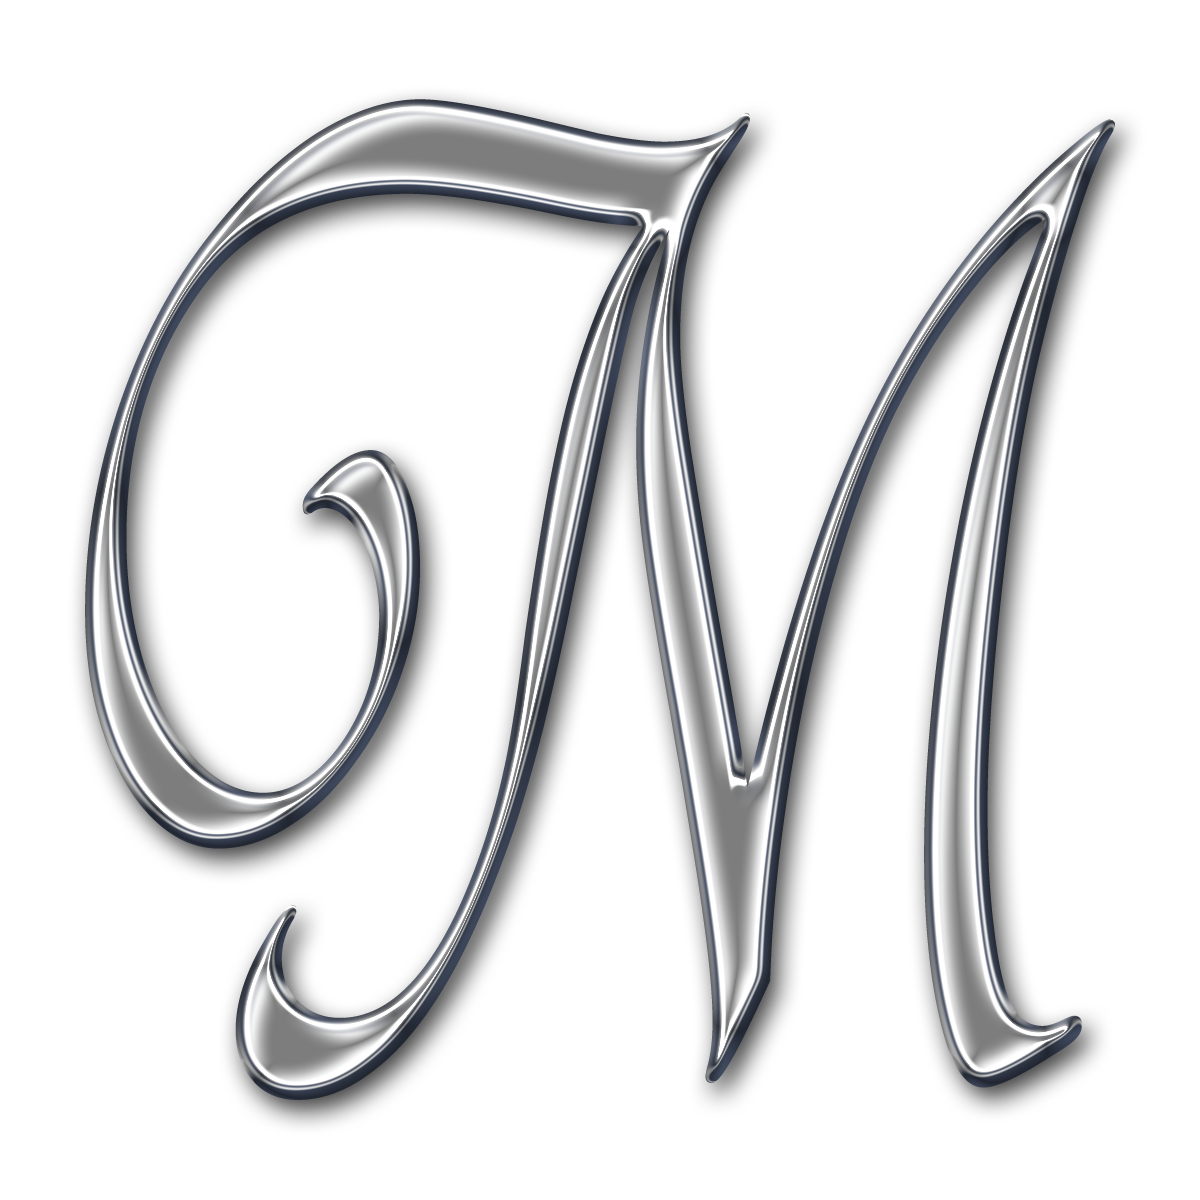 13 Fancy M Letter Outline Free Cliparts That You Can Download To You